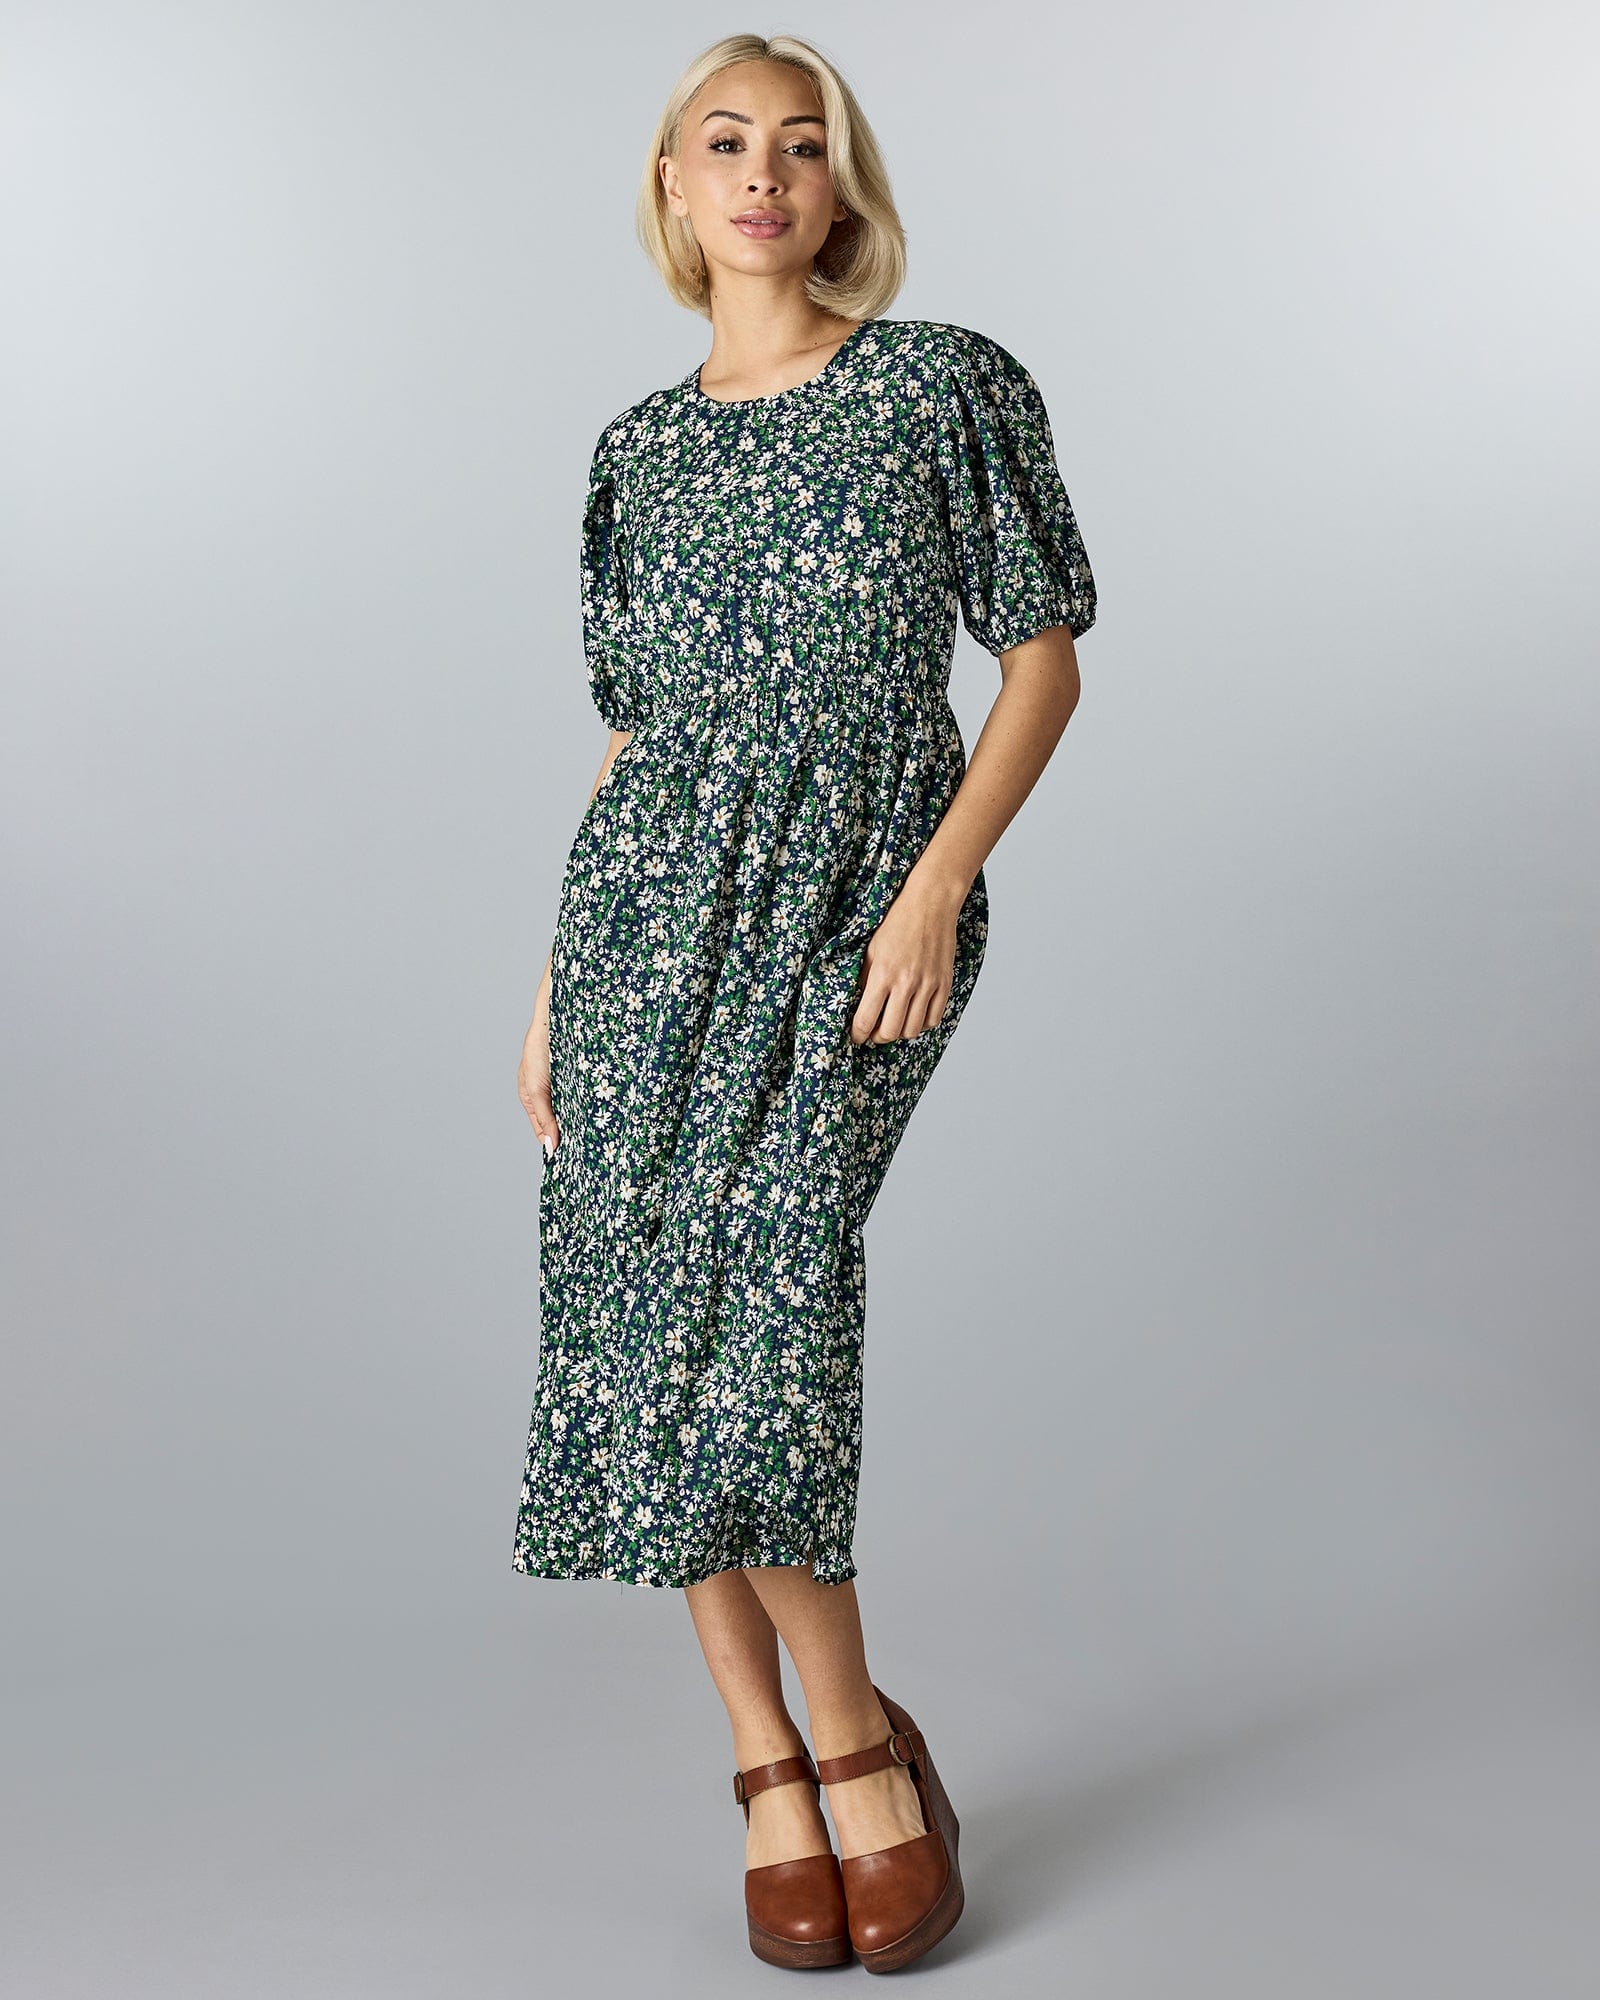 Woman in a blue and green floral, short sleeved, midi-length dress.